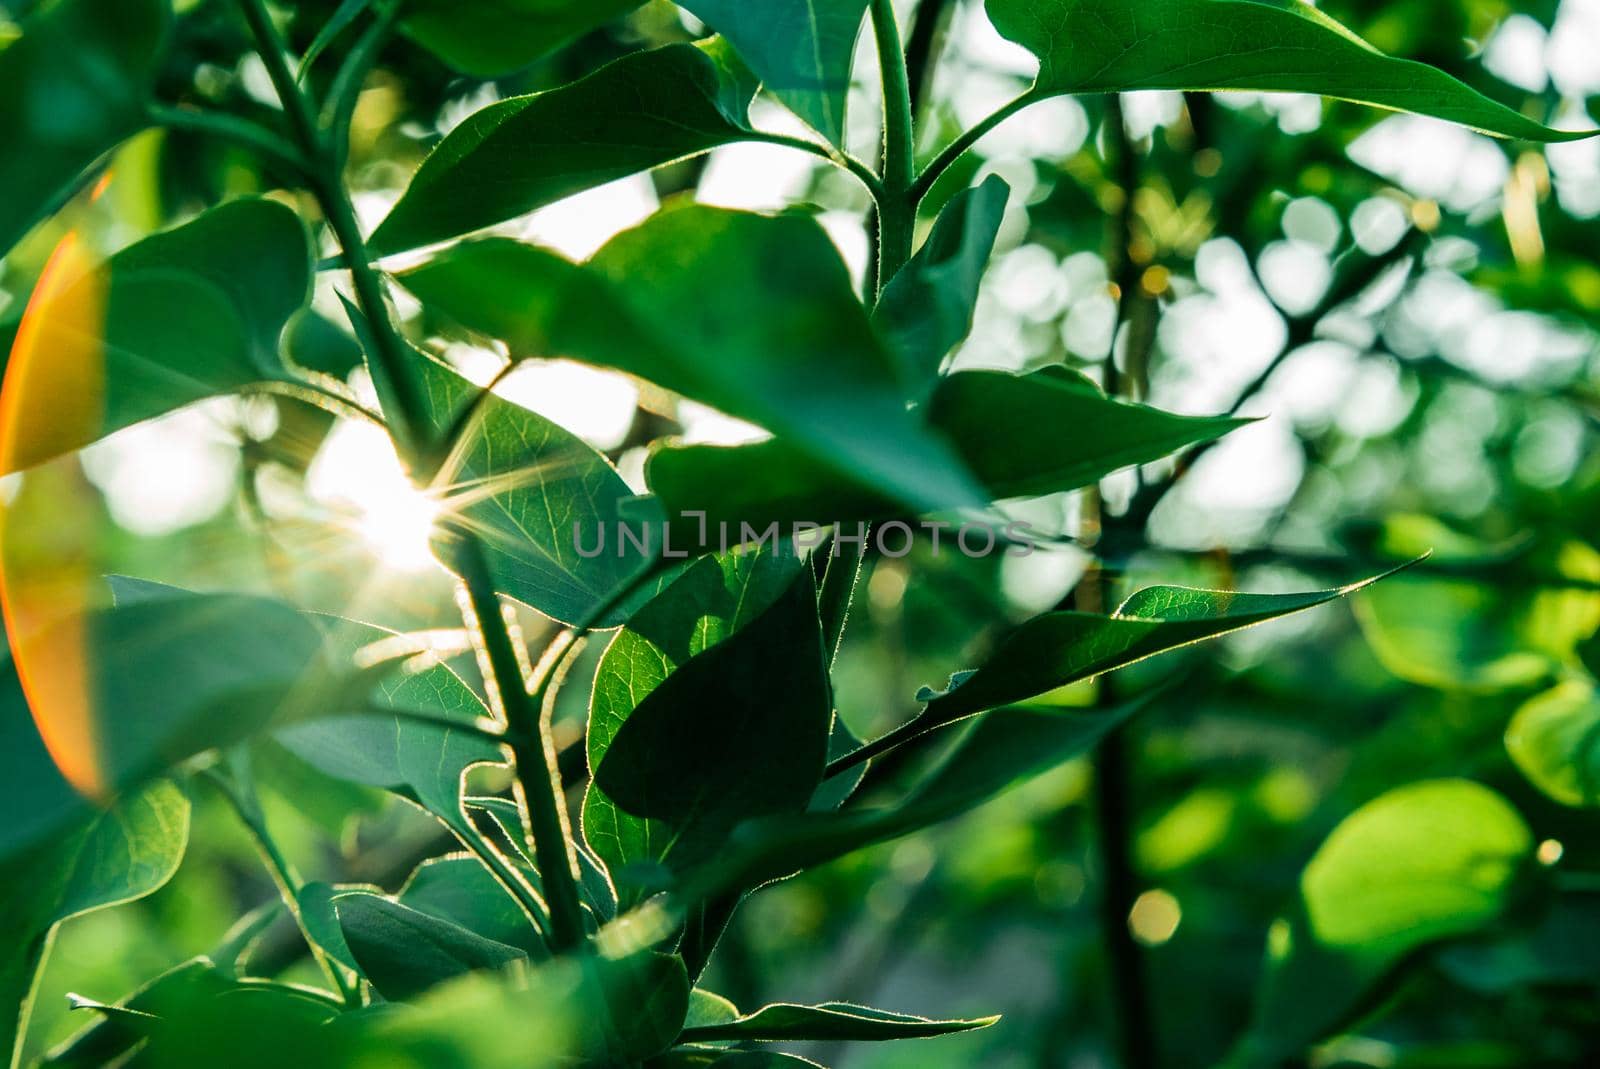 The rays of the sun make their way through the green leaves of the trees. Live texture with green leaves and breaking sun rays.,